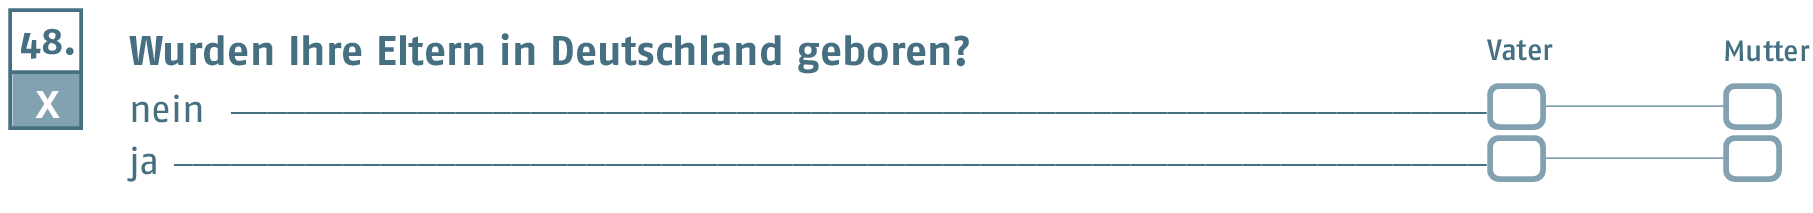 Were your parents born in Germany?